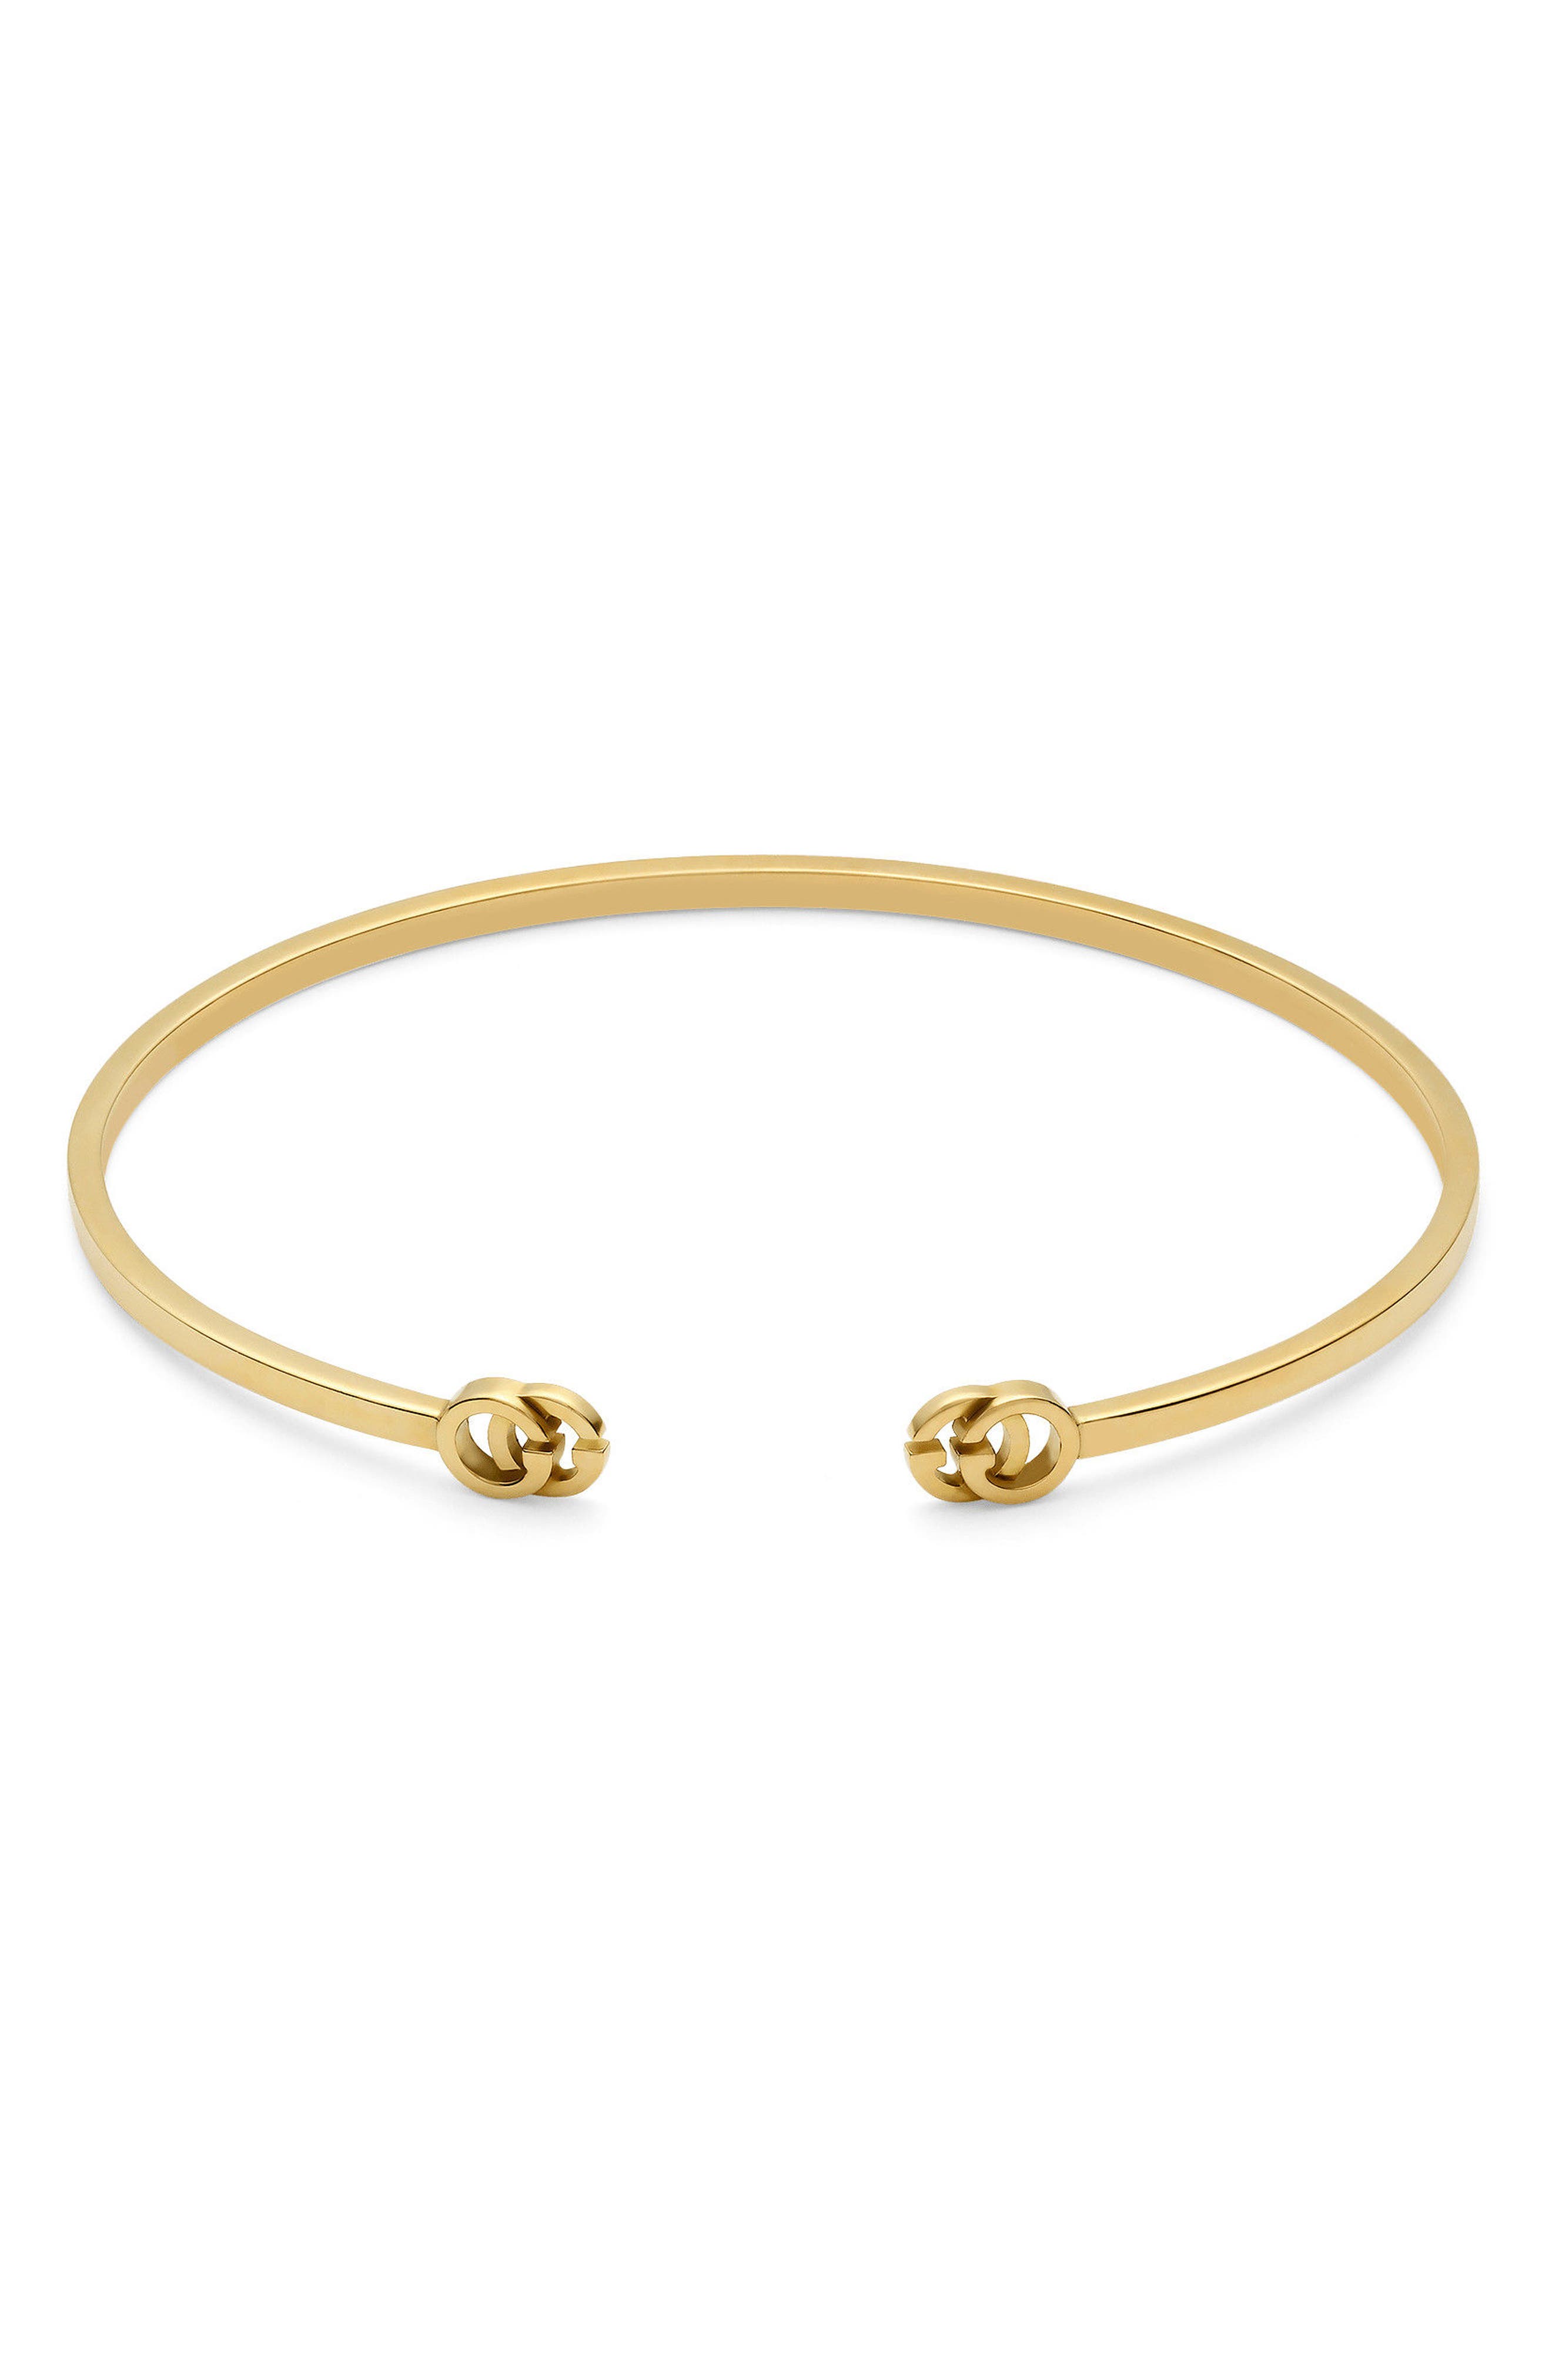 Women's 18k Gold Gucci Jewelry | Nordstrom